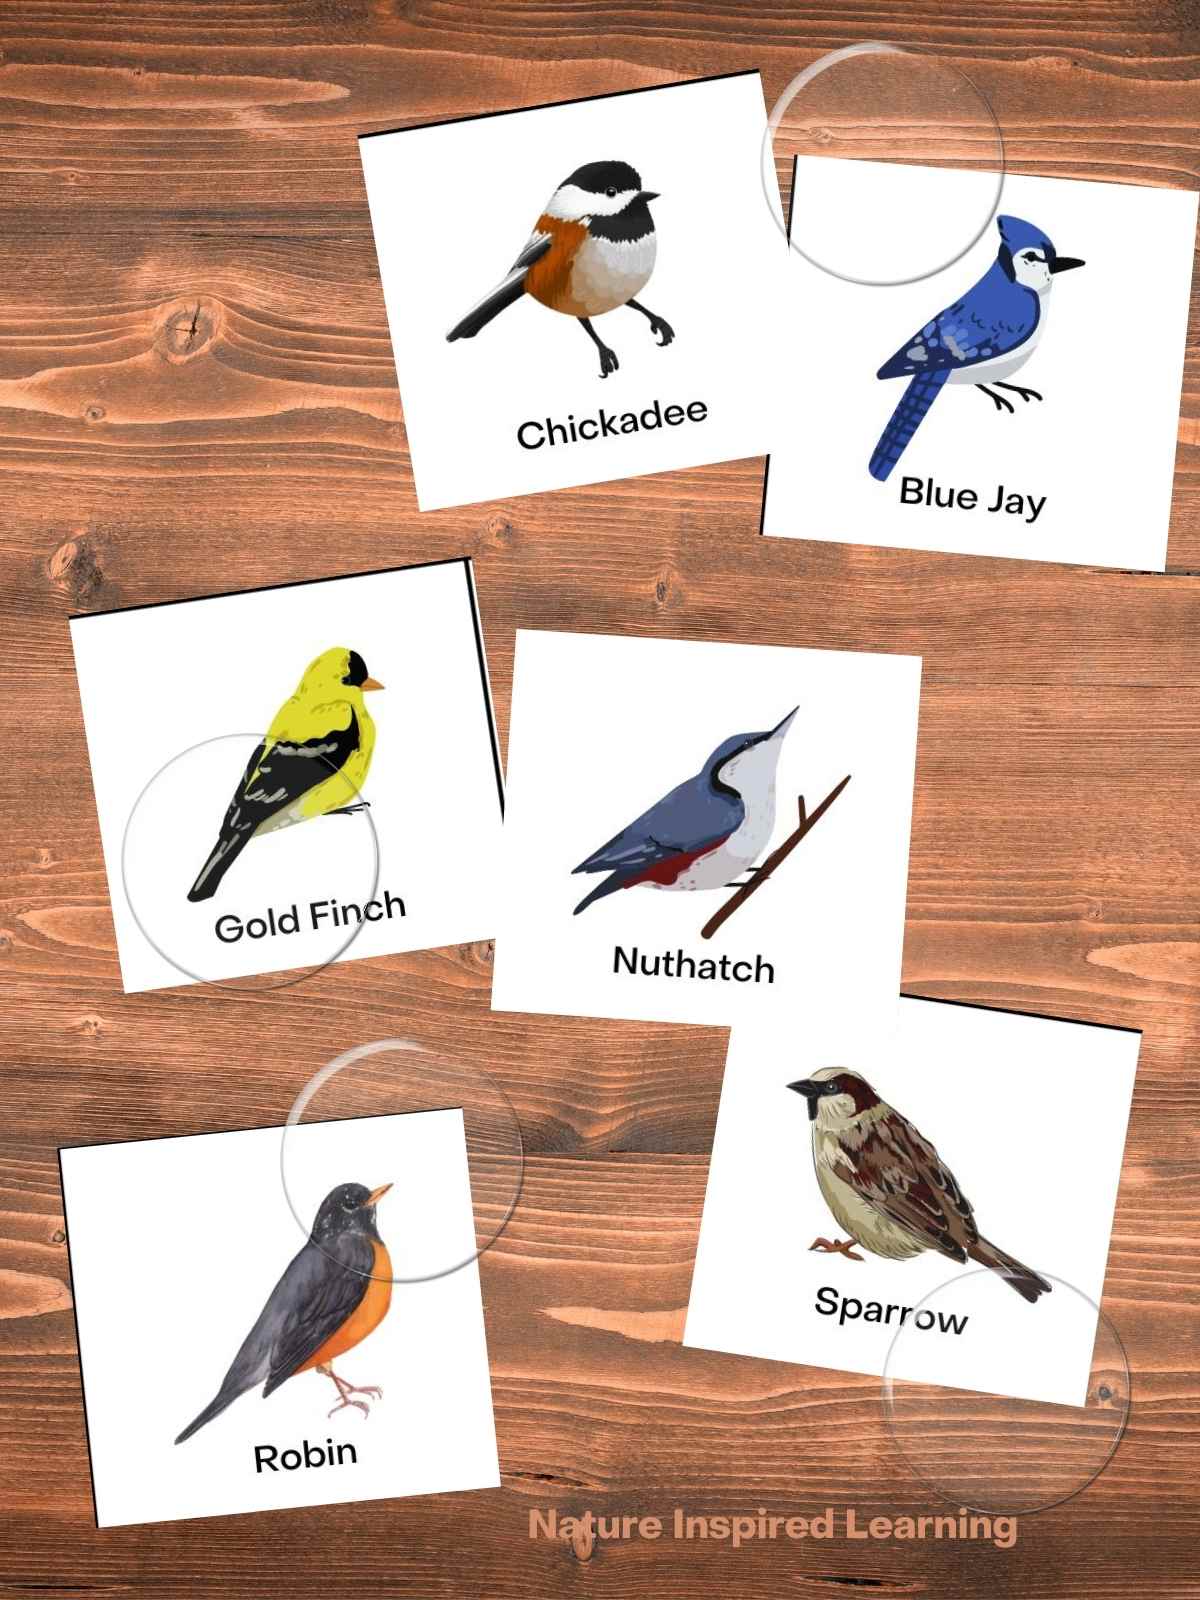 cut out bird cards with images and names on a wooden background with clear plastic bingo chips. Cards include a chickadee, blue jay, gold finch, nuthatch, robin, and sparrow